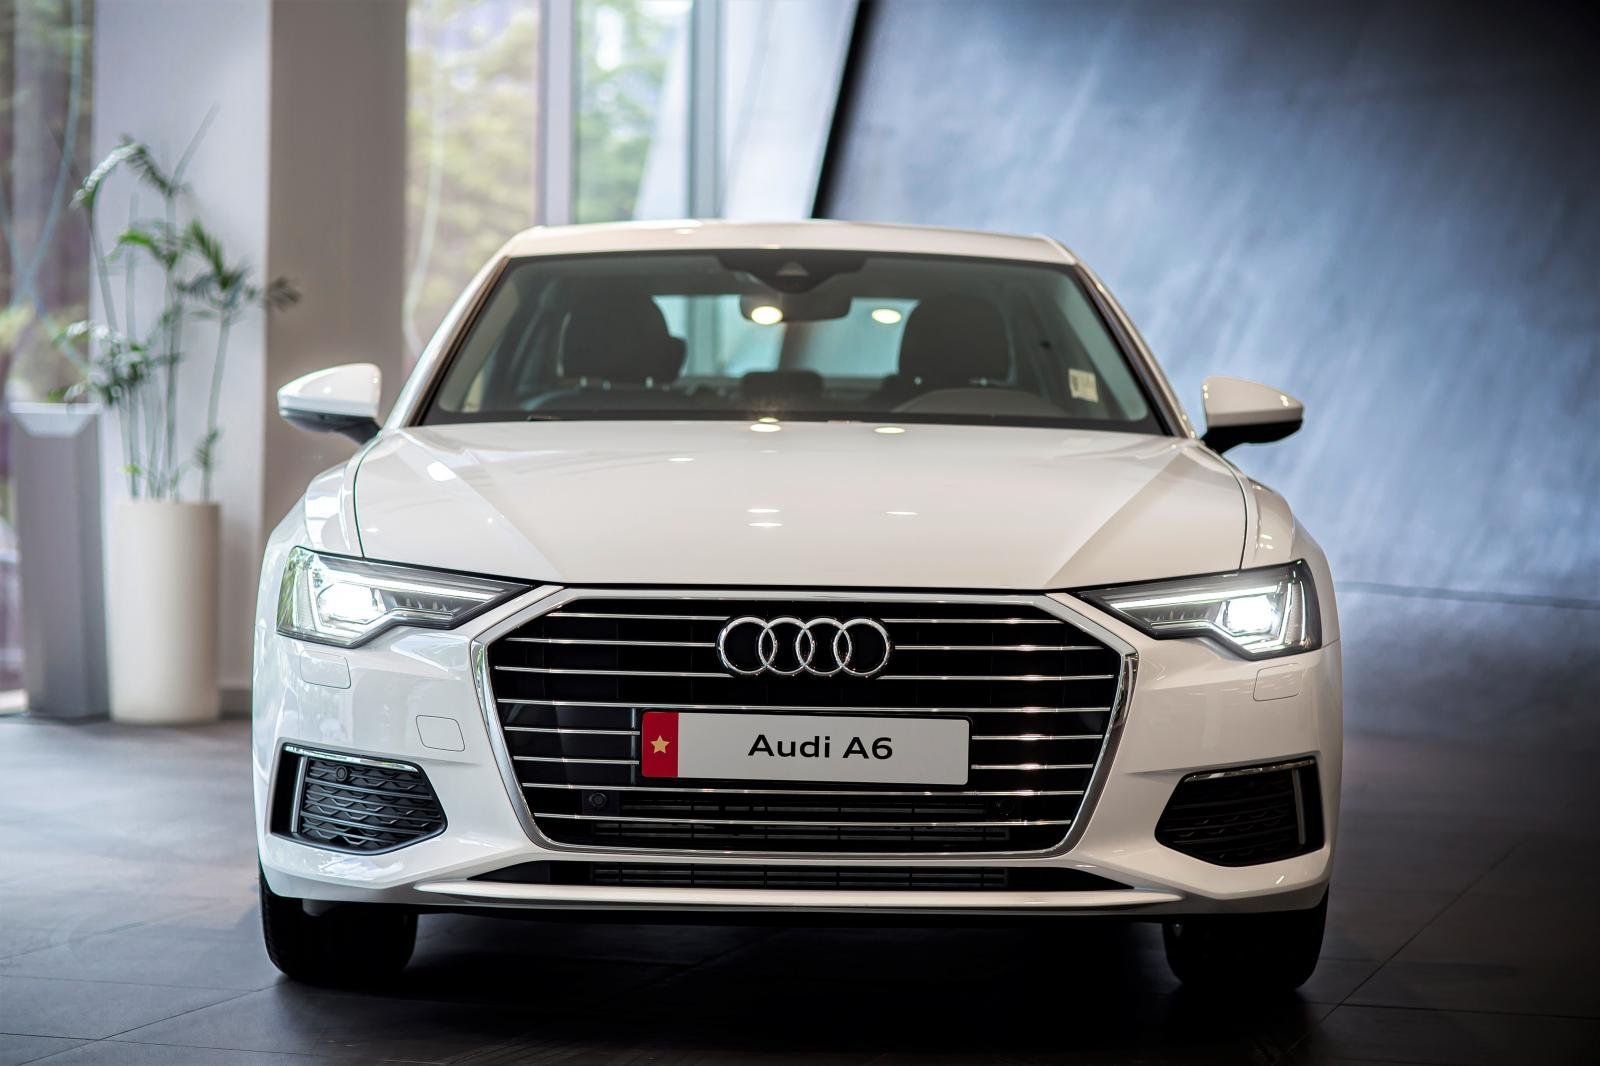 Audi recalls more than 100 cars in Vietnam over nut defect